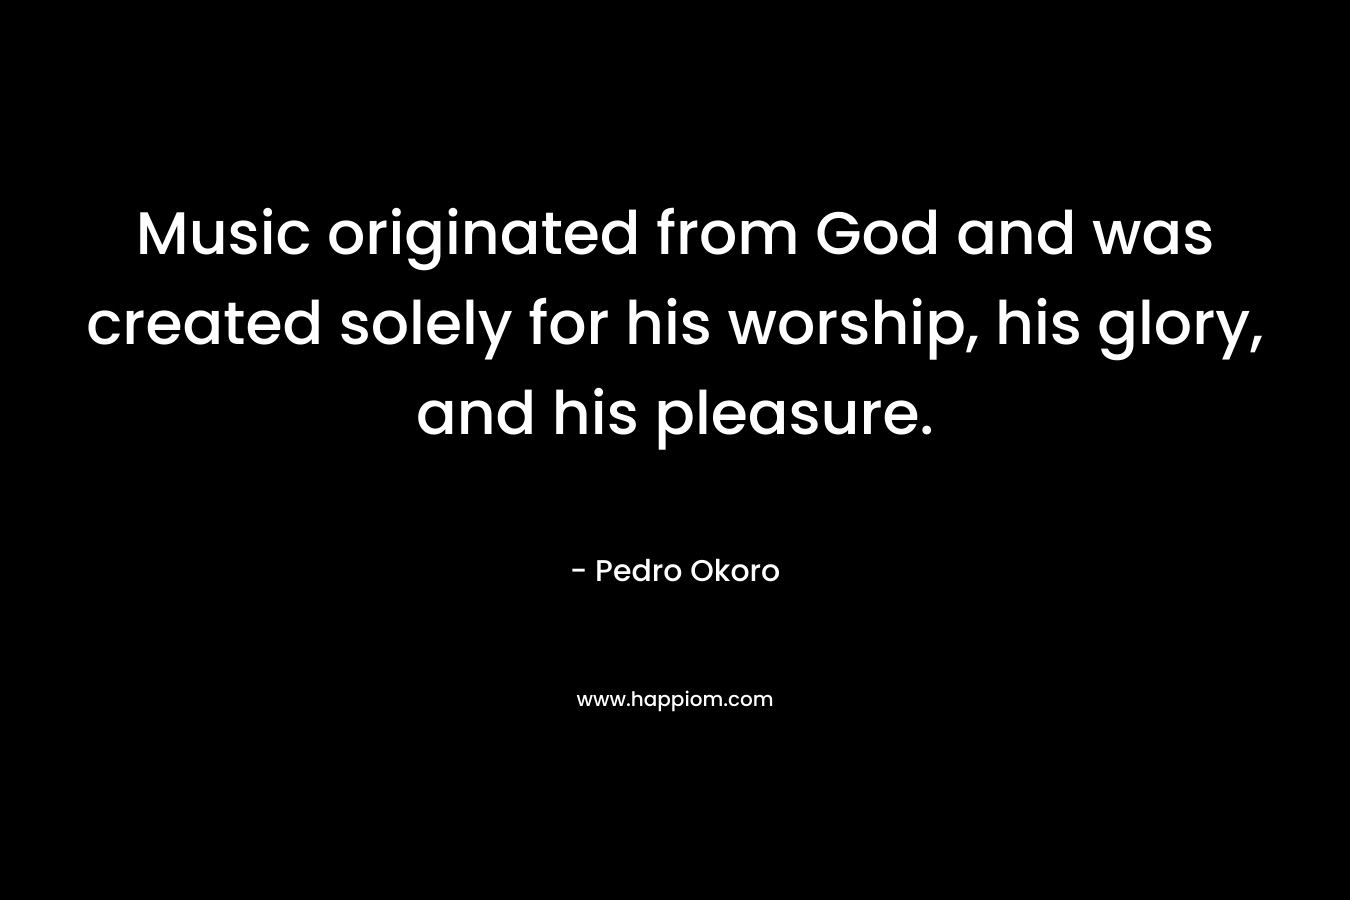 Music originated from God and was created solely for his worship, his glory, and his pleasure.